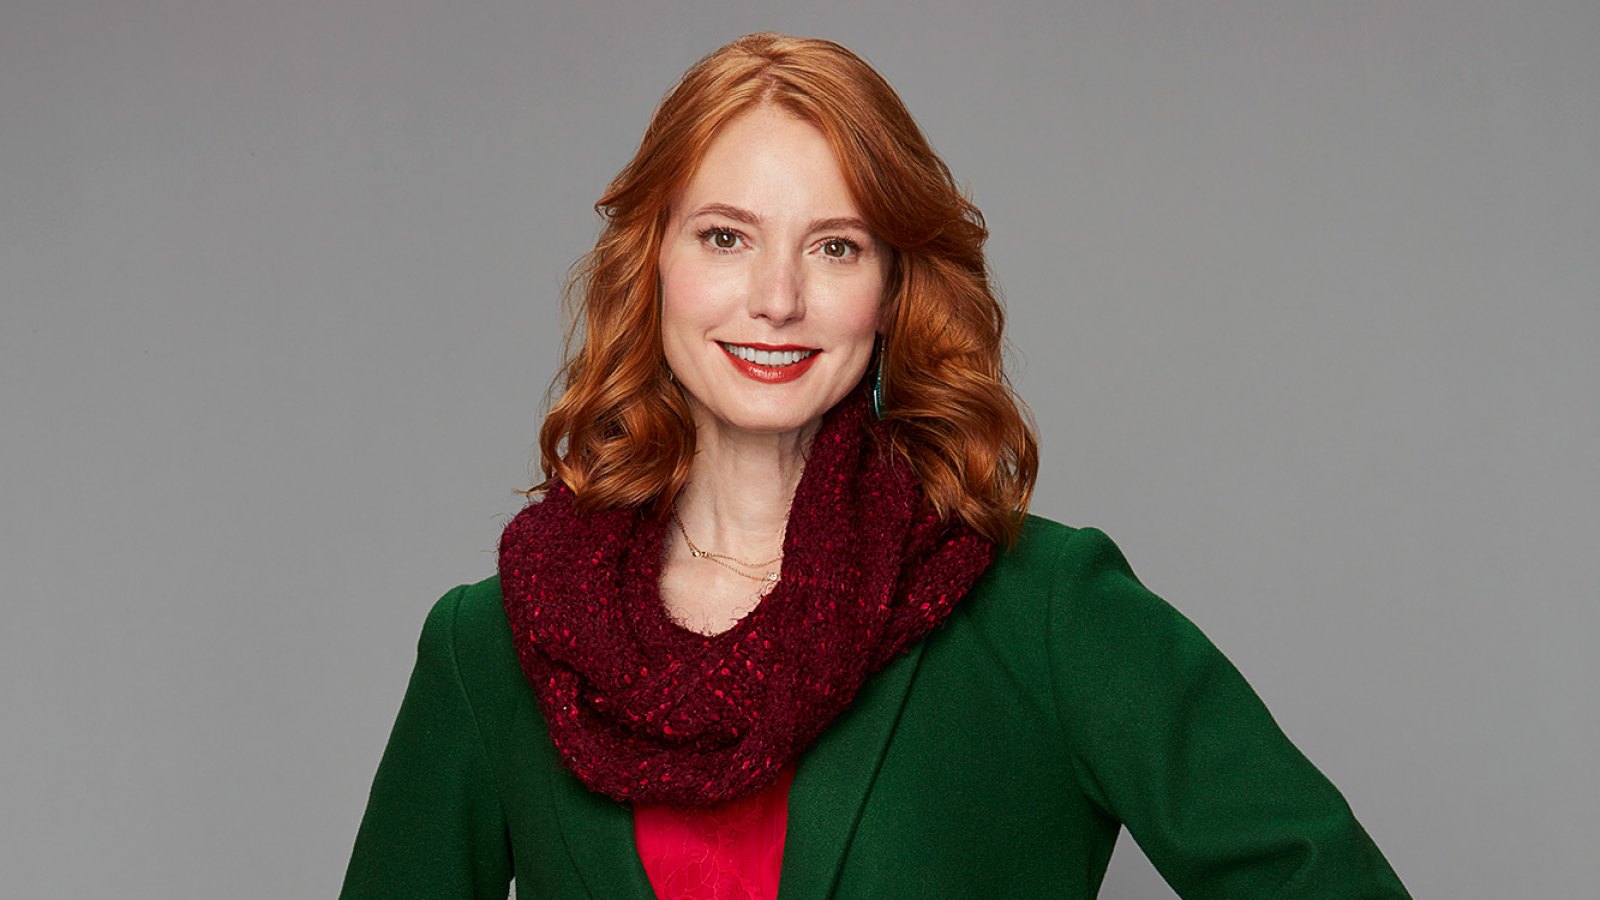 Hallmark Actress Alicia Witt Shows Off Hair Growth Amid Cancer Battle 1 Year After Parents Froze to Death 680 FEATURE